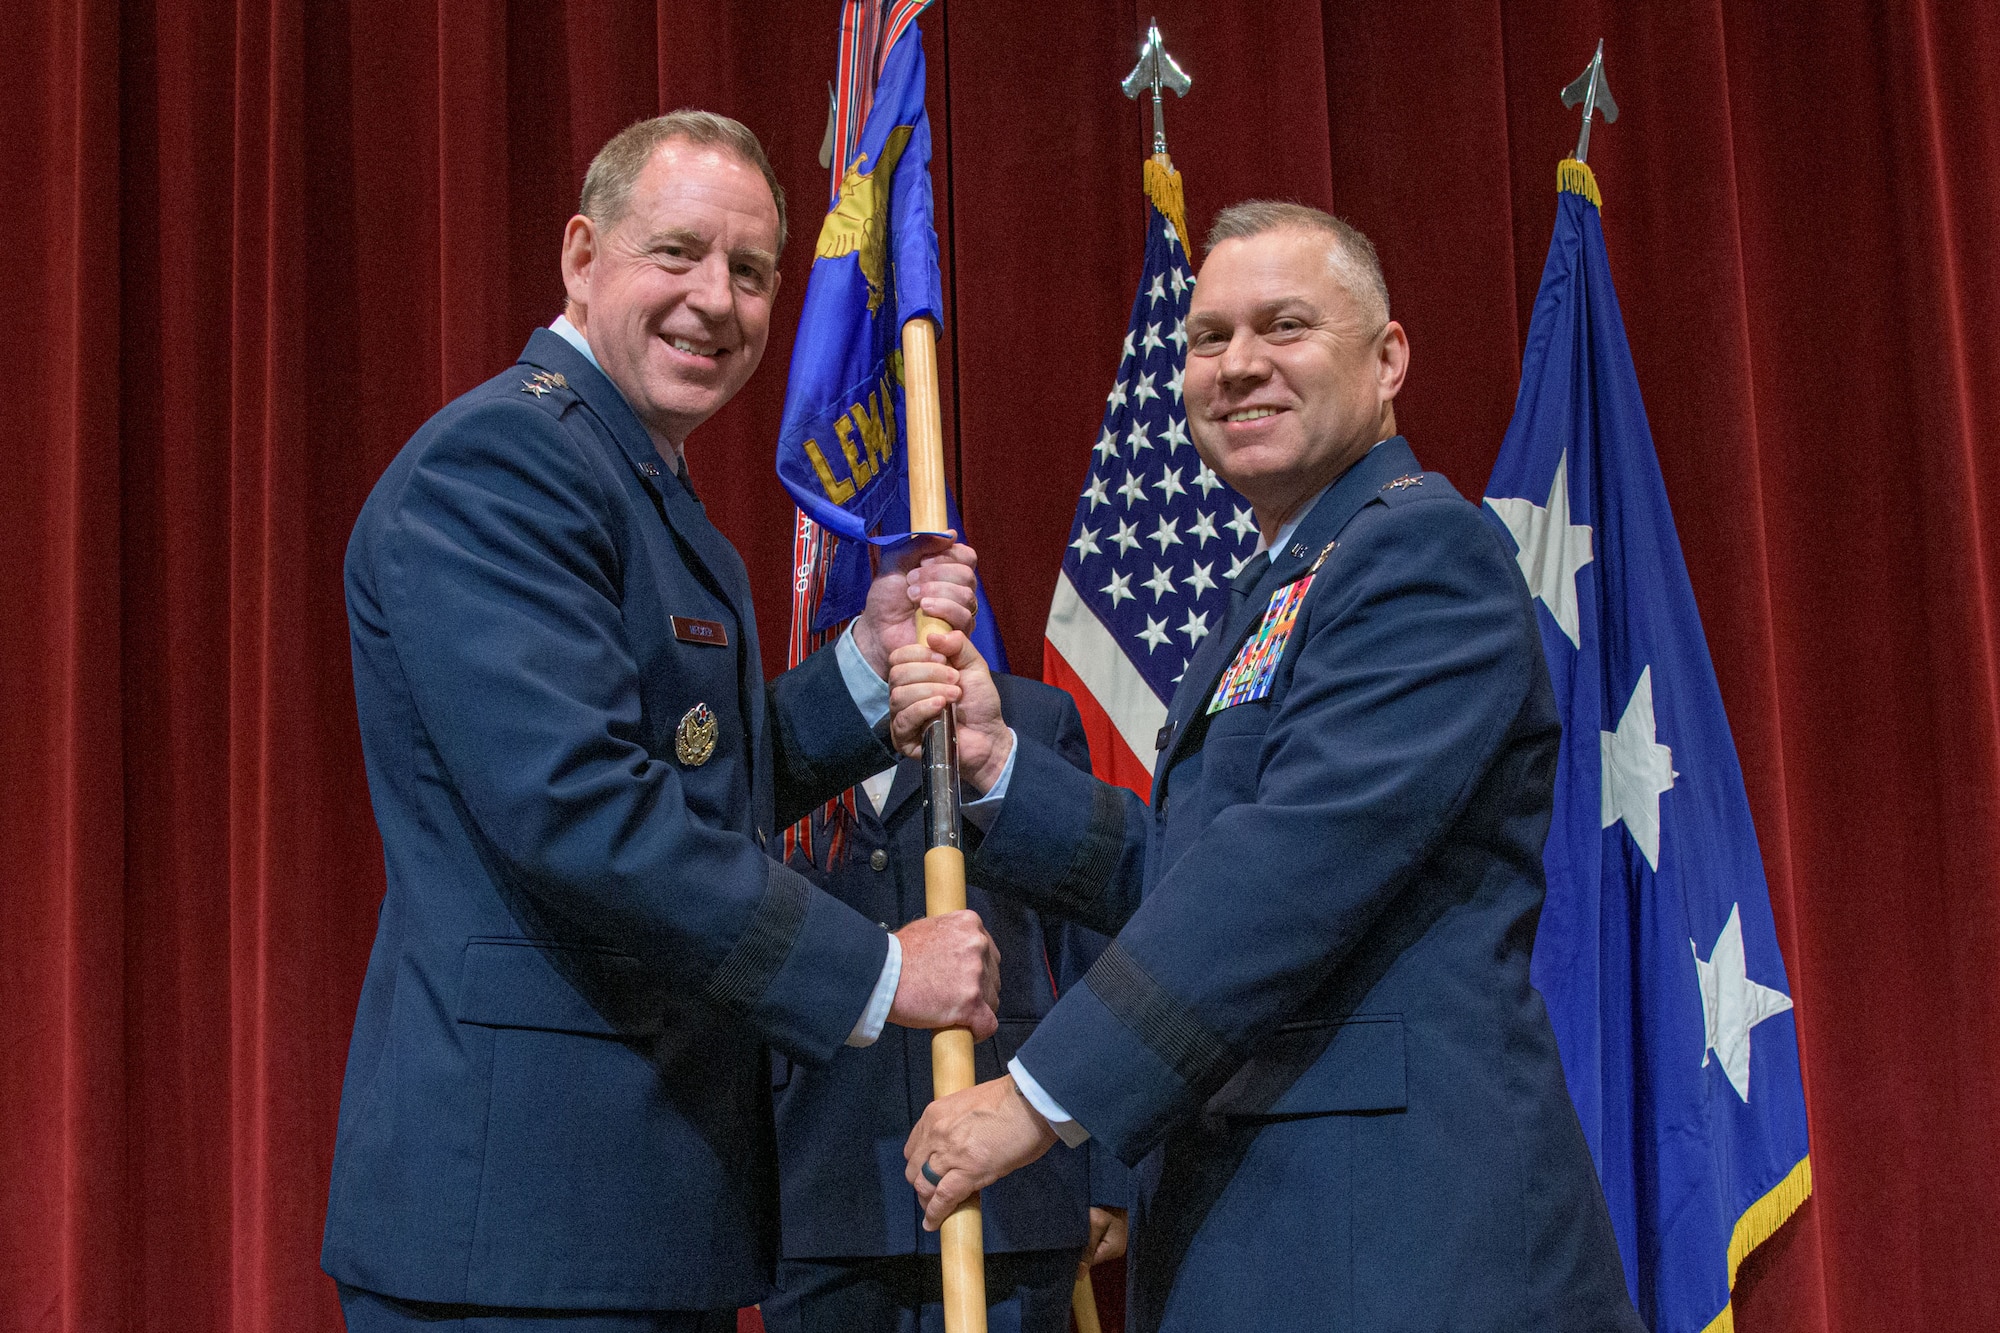 Lieutenant Gen. James B. Hecker (left), commander and president, Air University, passes the guidon to Maj. Gen. William G. Holt II at Maxwell Air Force Base, Alabama, May 24, 2021.